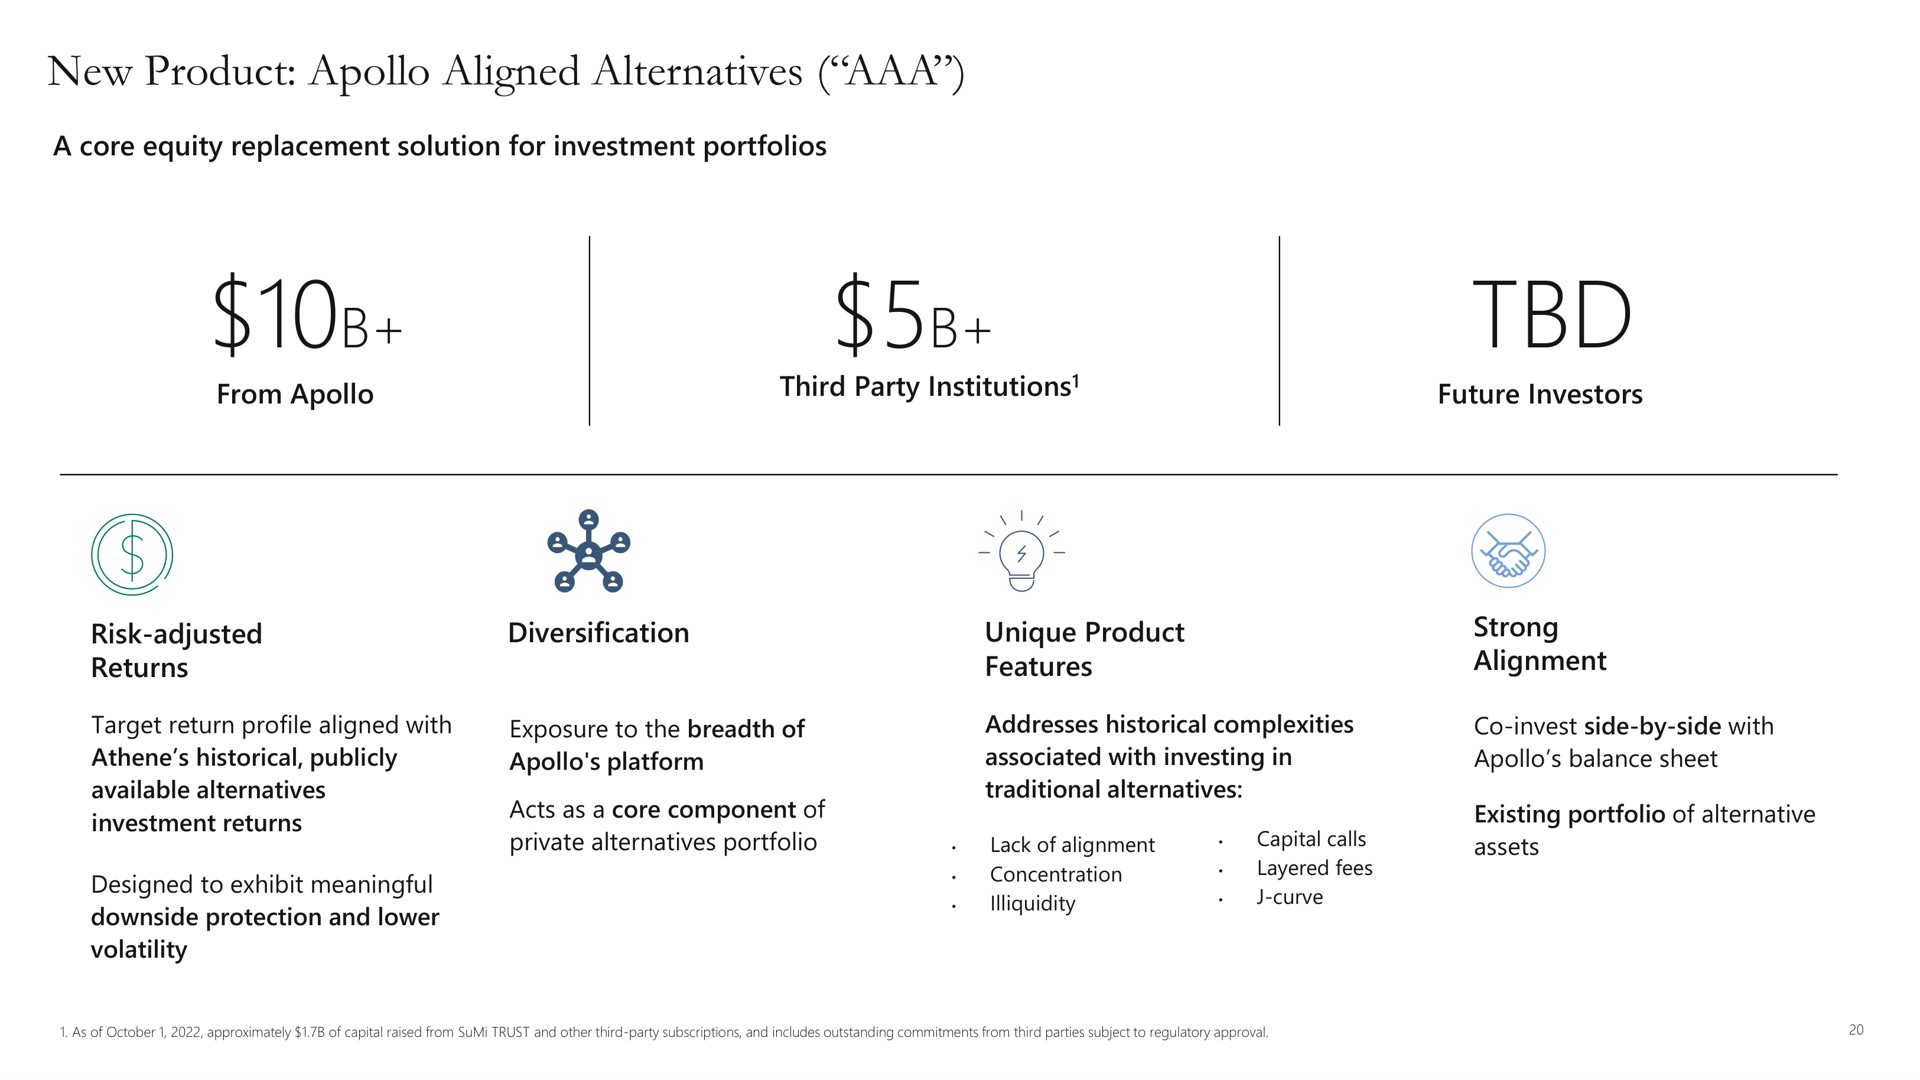 new product aligned alternatives | Apollo Global Management